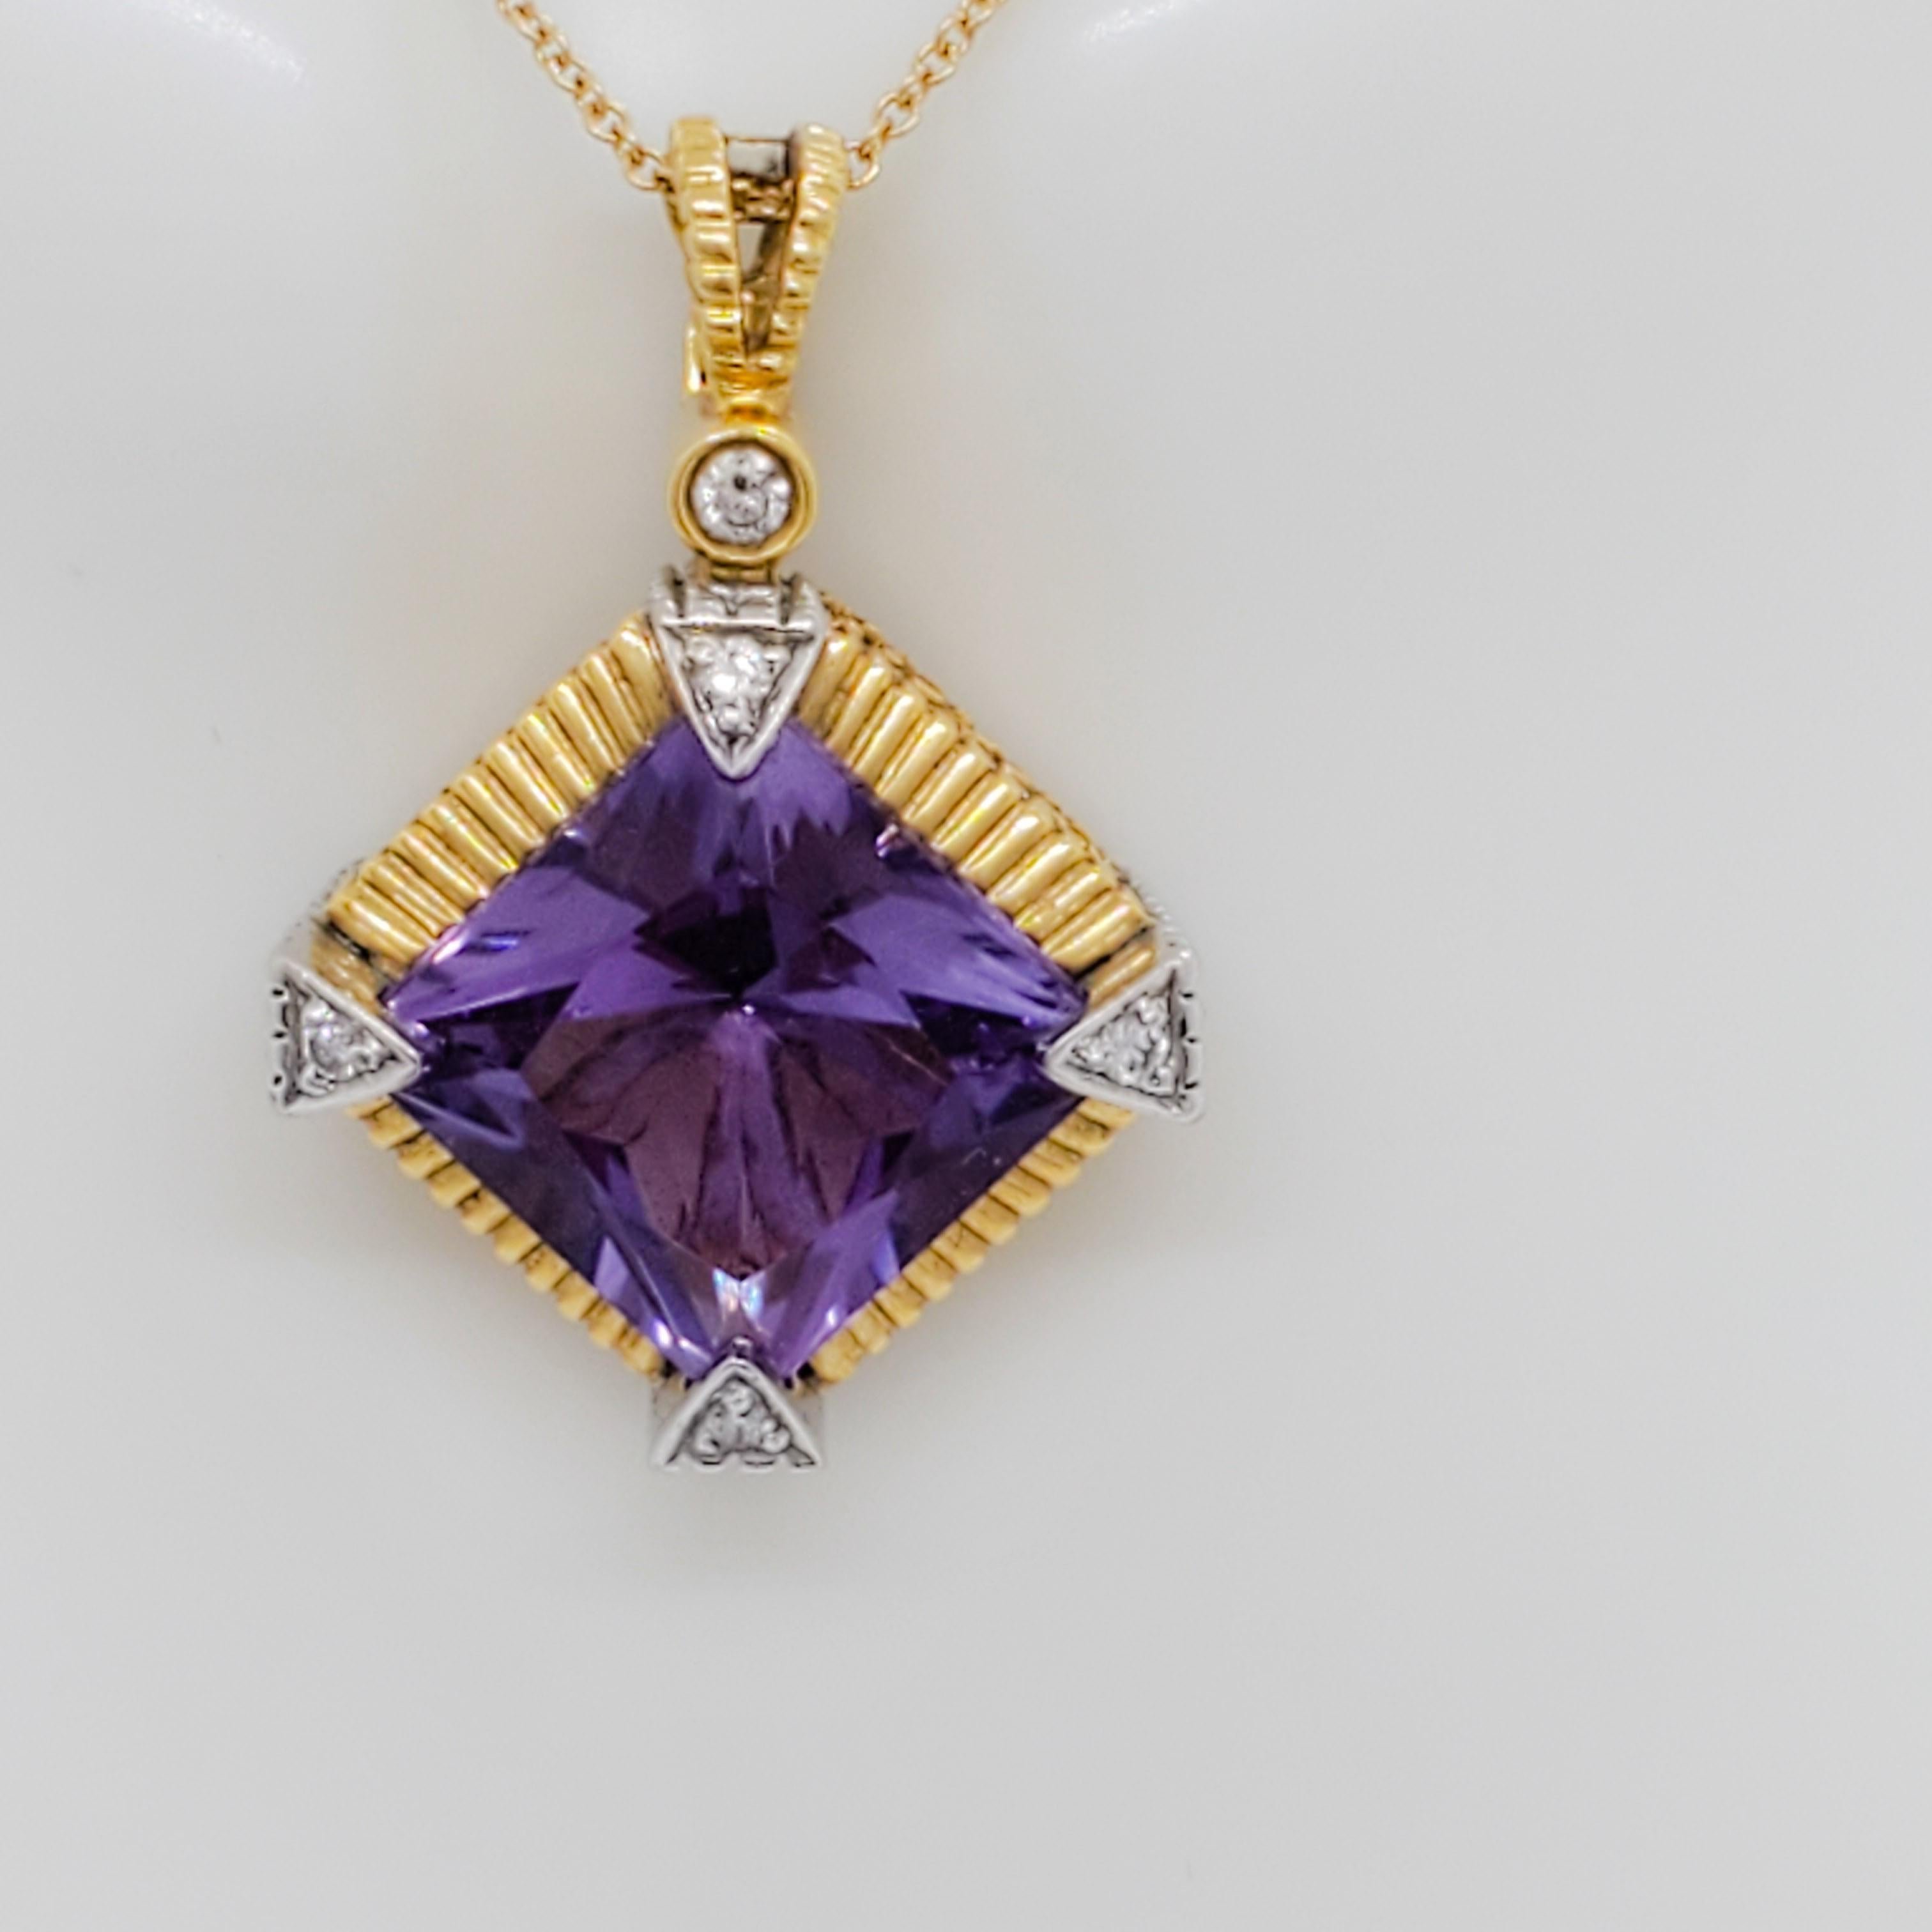 Gorgeous deep purple 5.00 ct. amethyst princess cut with 1.00 ct. good quality white and bright diamond rounds.  Handmade in 18k white and yellow gold.  Chain is 16